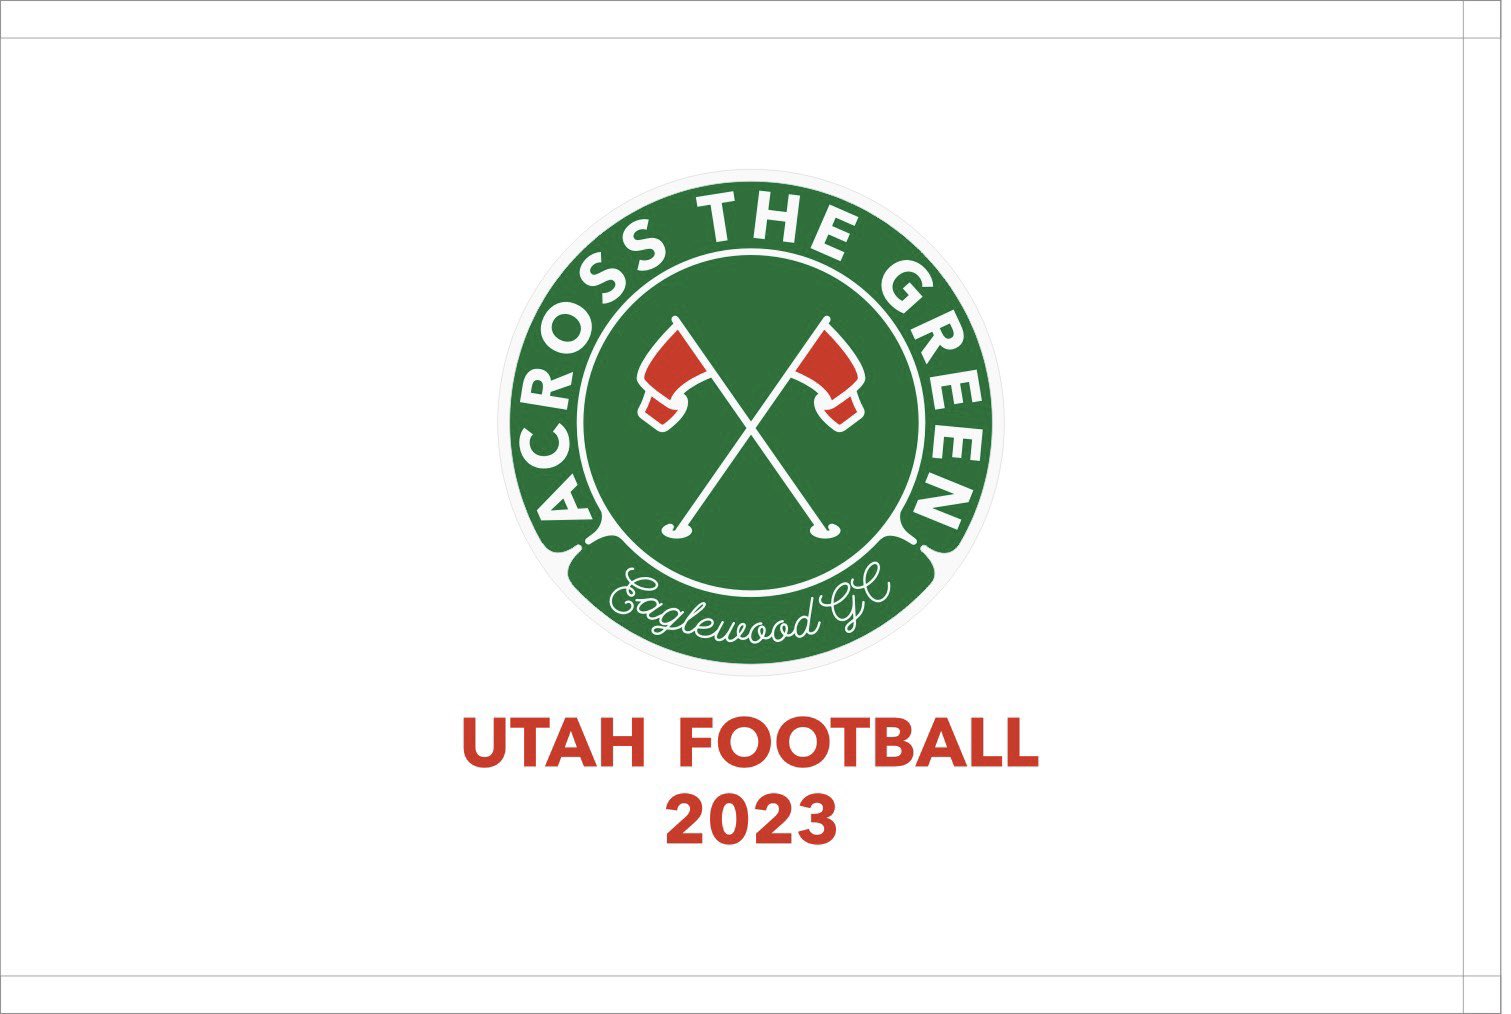 Support Utah football at the Across The Green NIL Golf Tournament